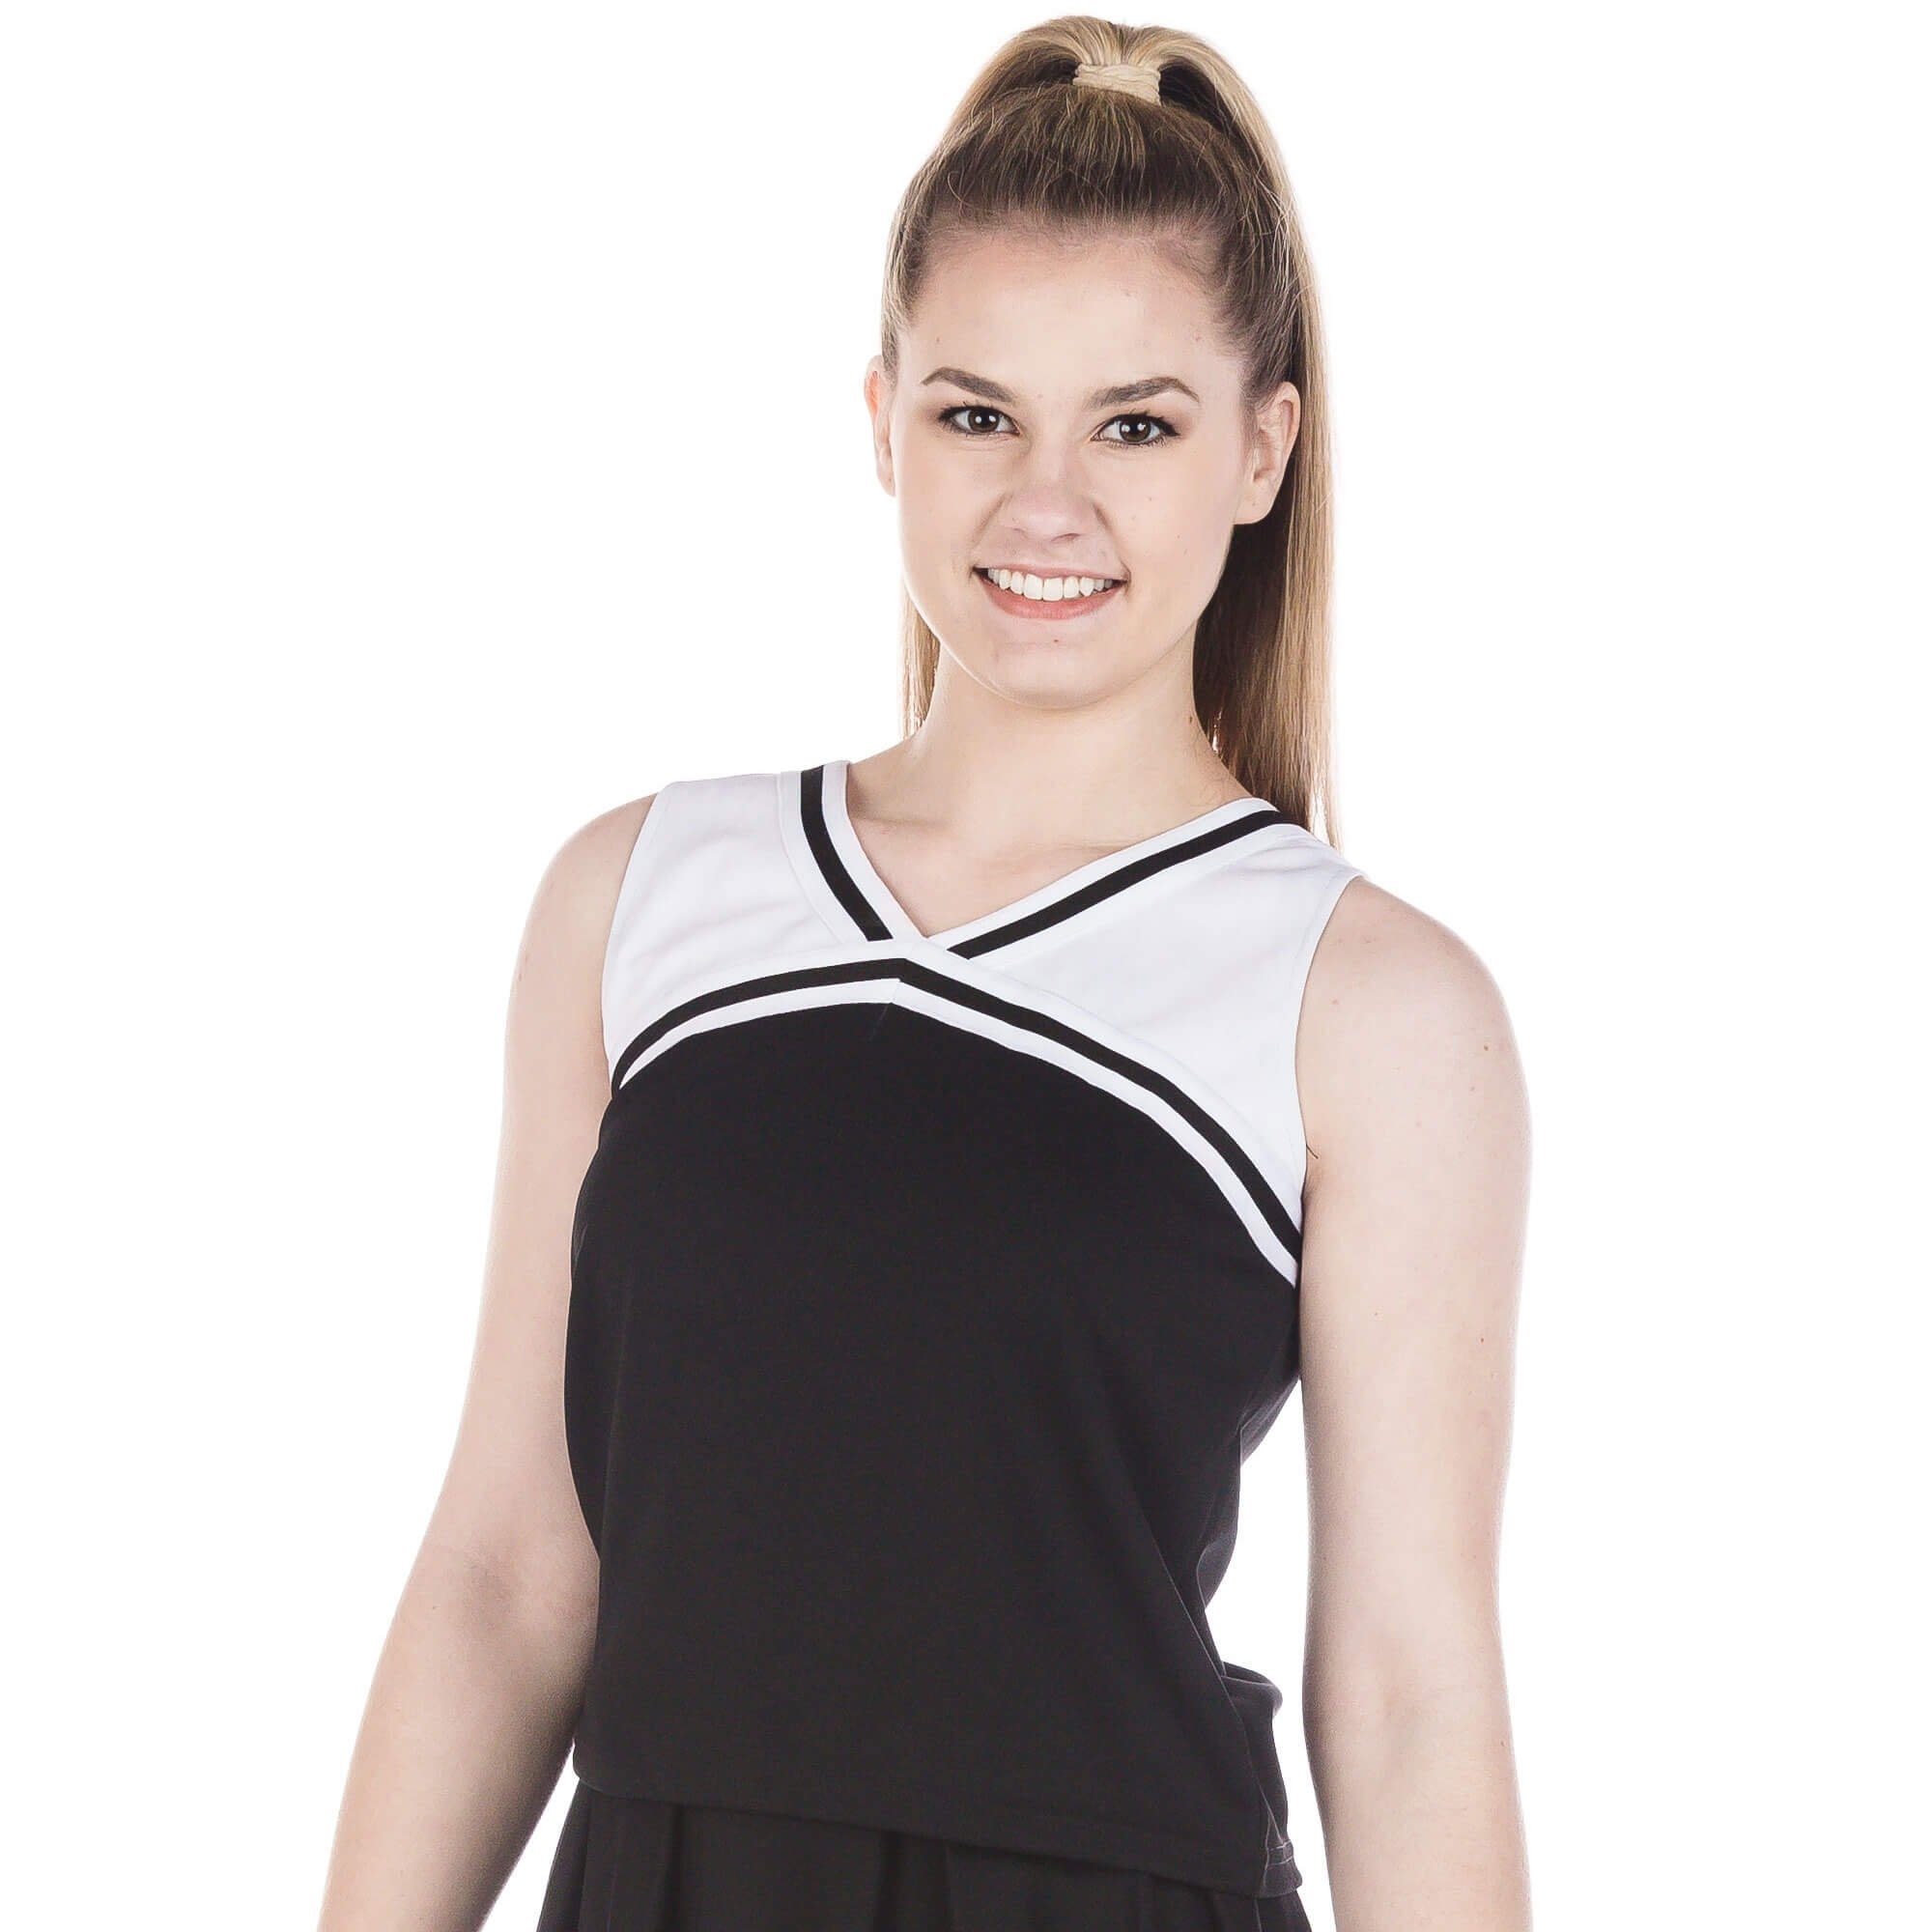 Danzcue Adult Classic Cheerleaders Uniform Shell Top - Click Image to Close